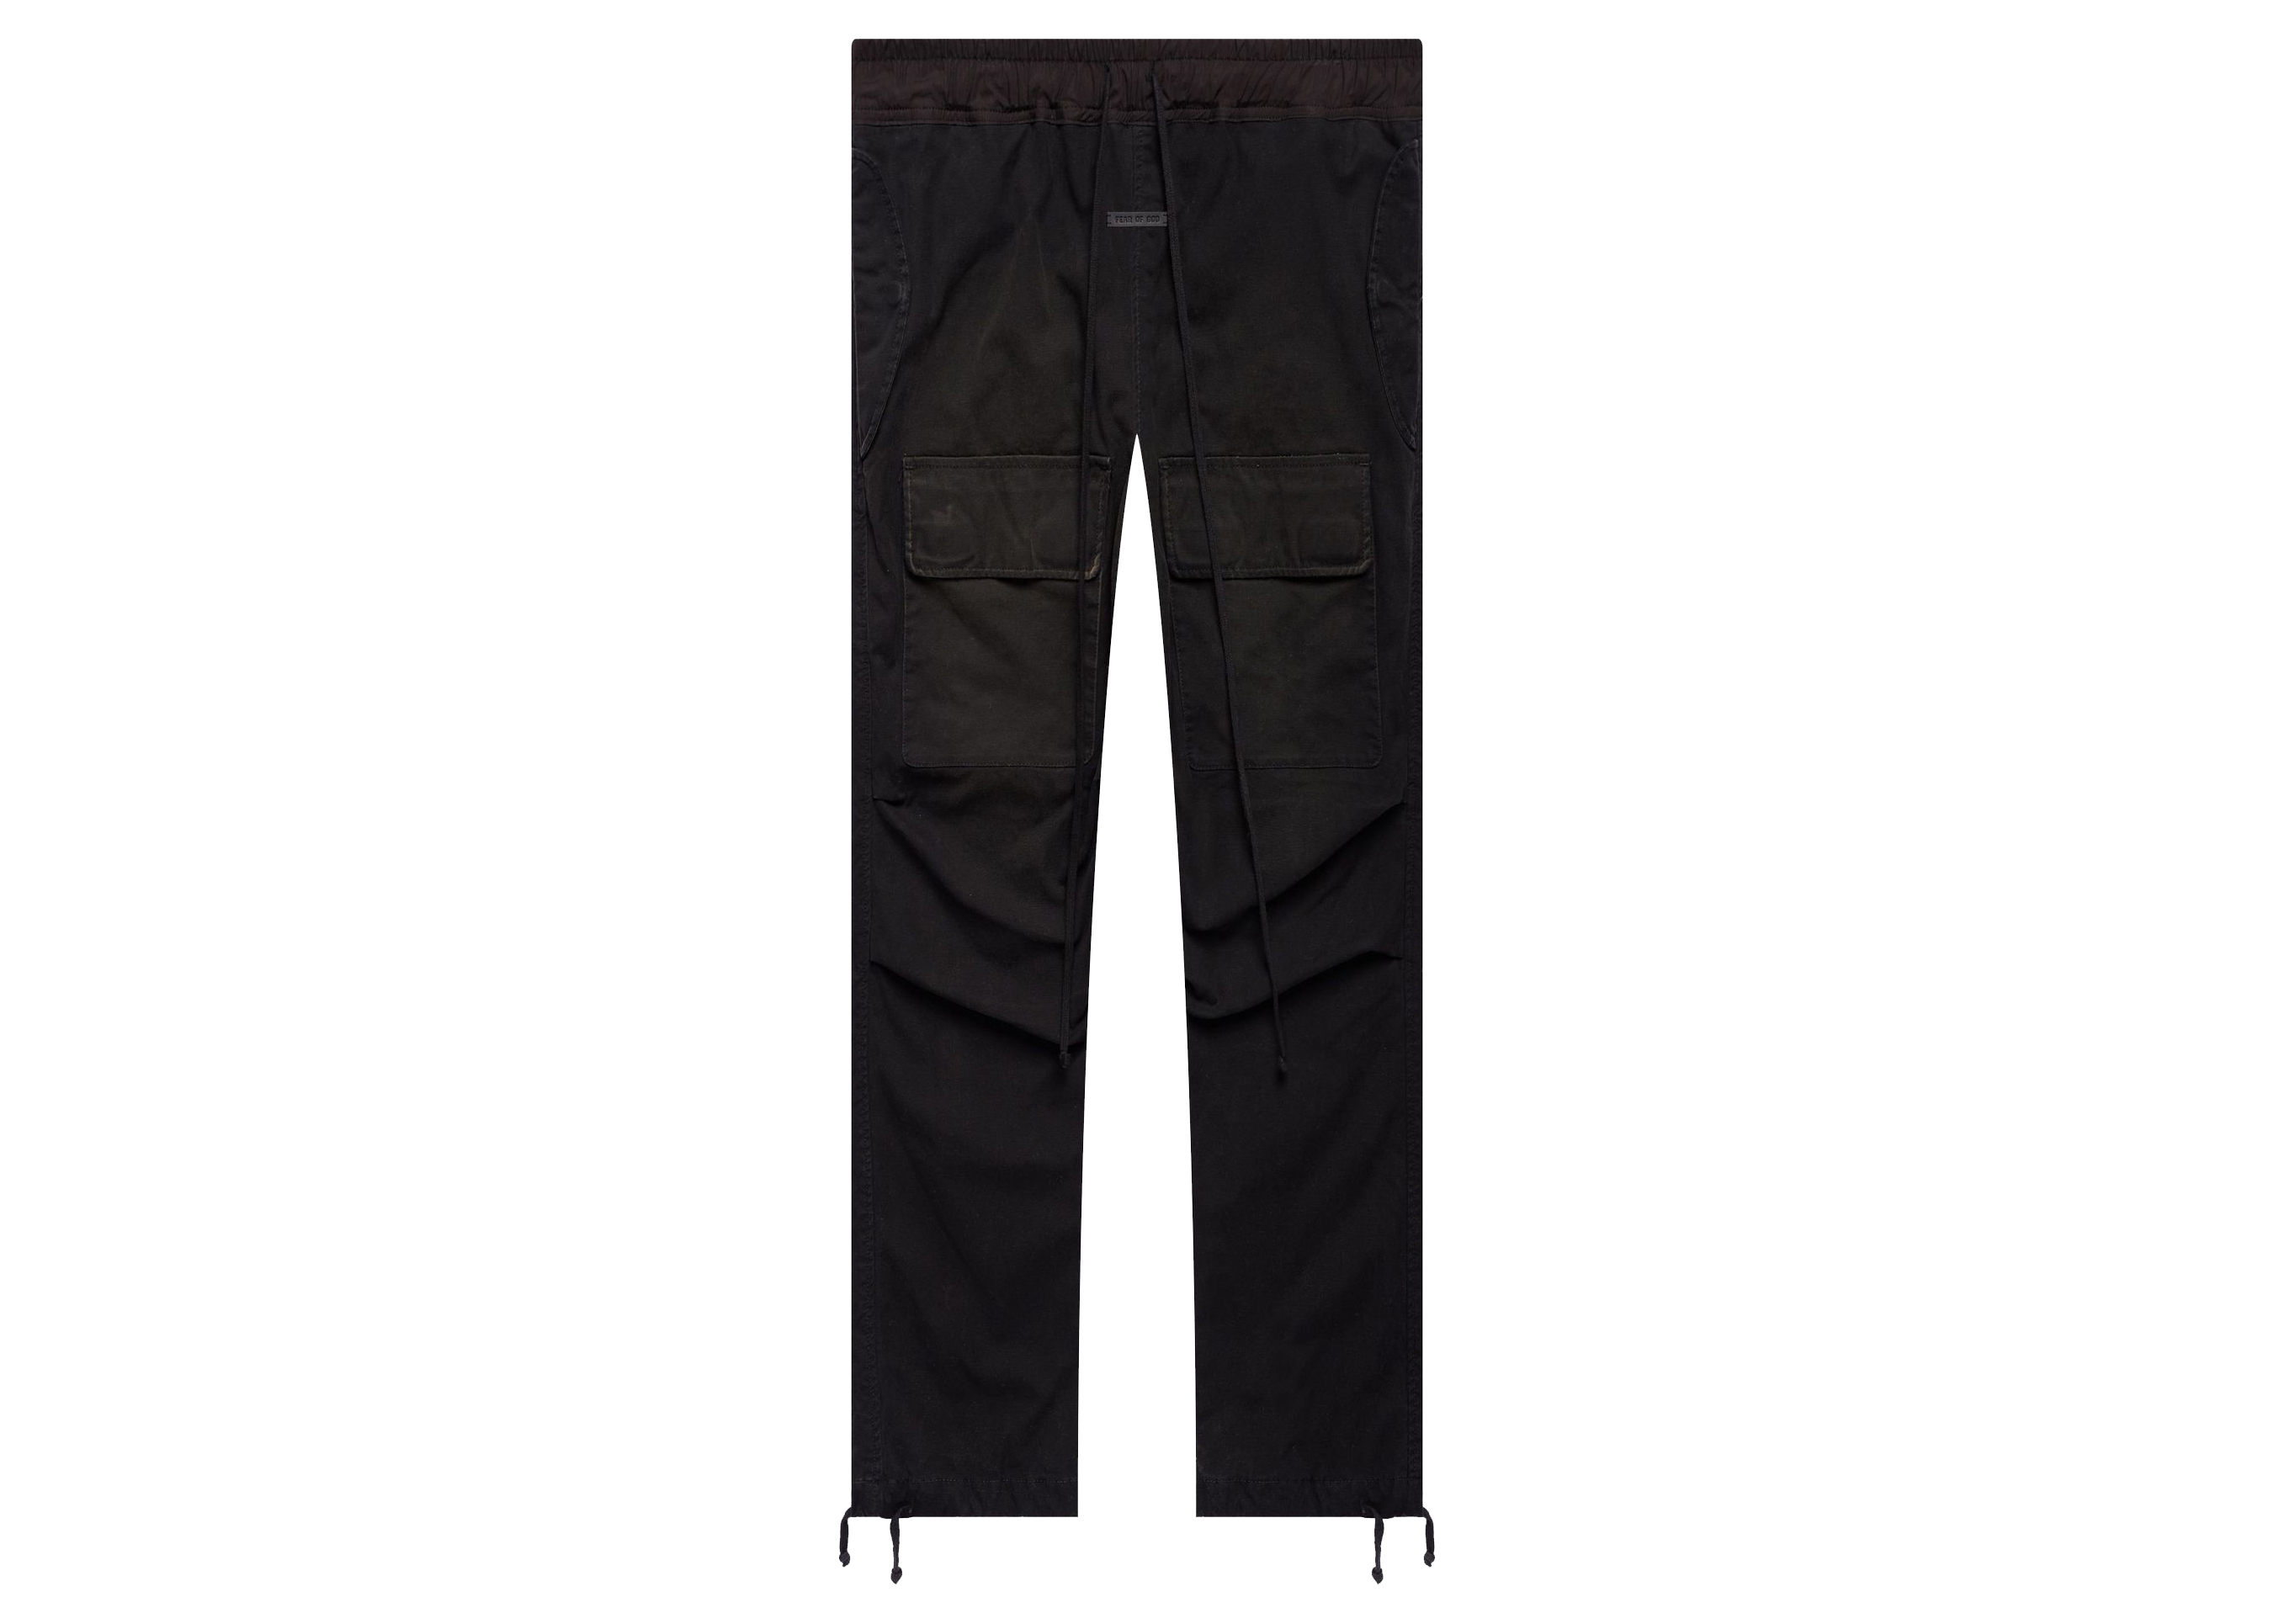 Fear of God Seventh Collection Cargo Pant Black Men's - SEVENTH